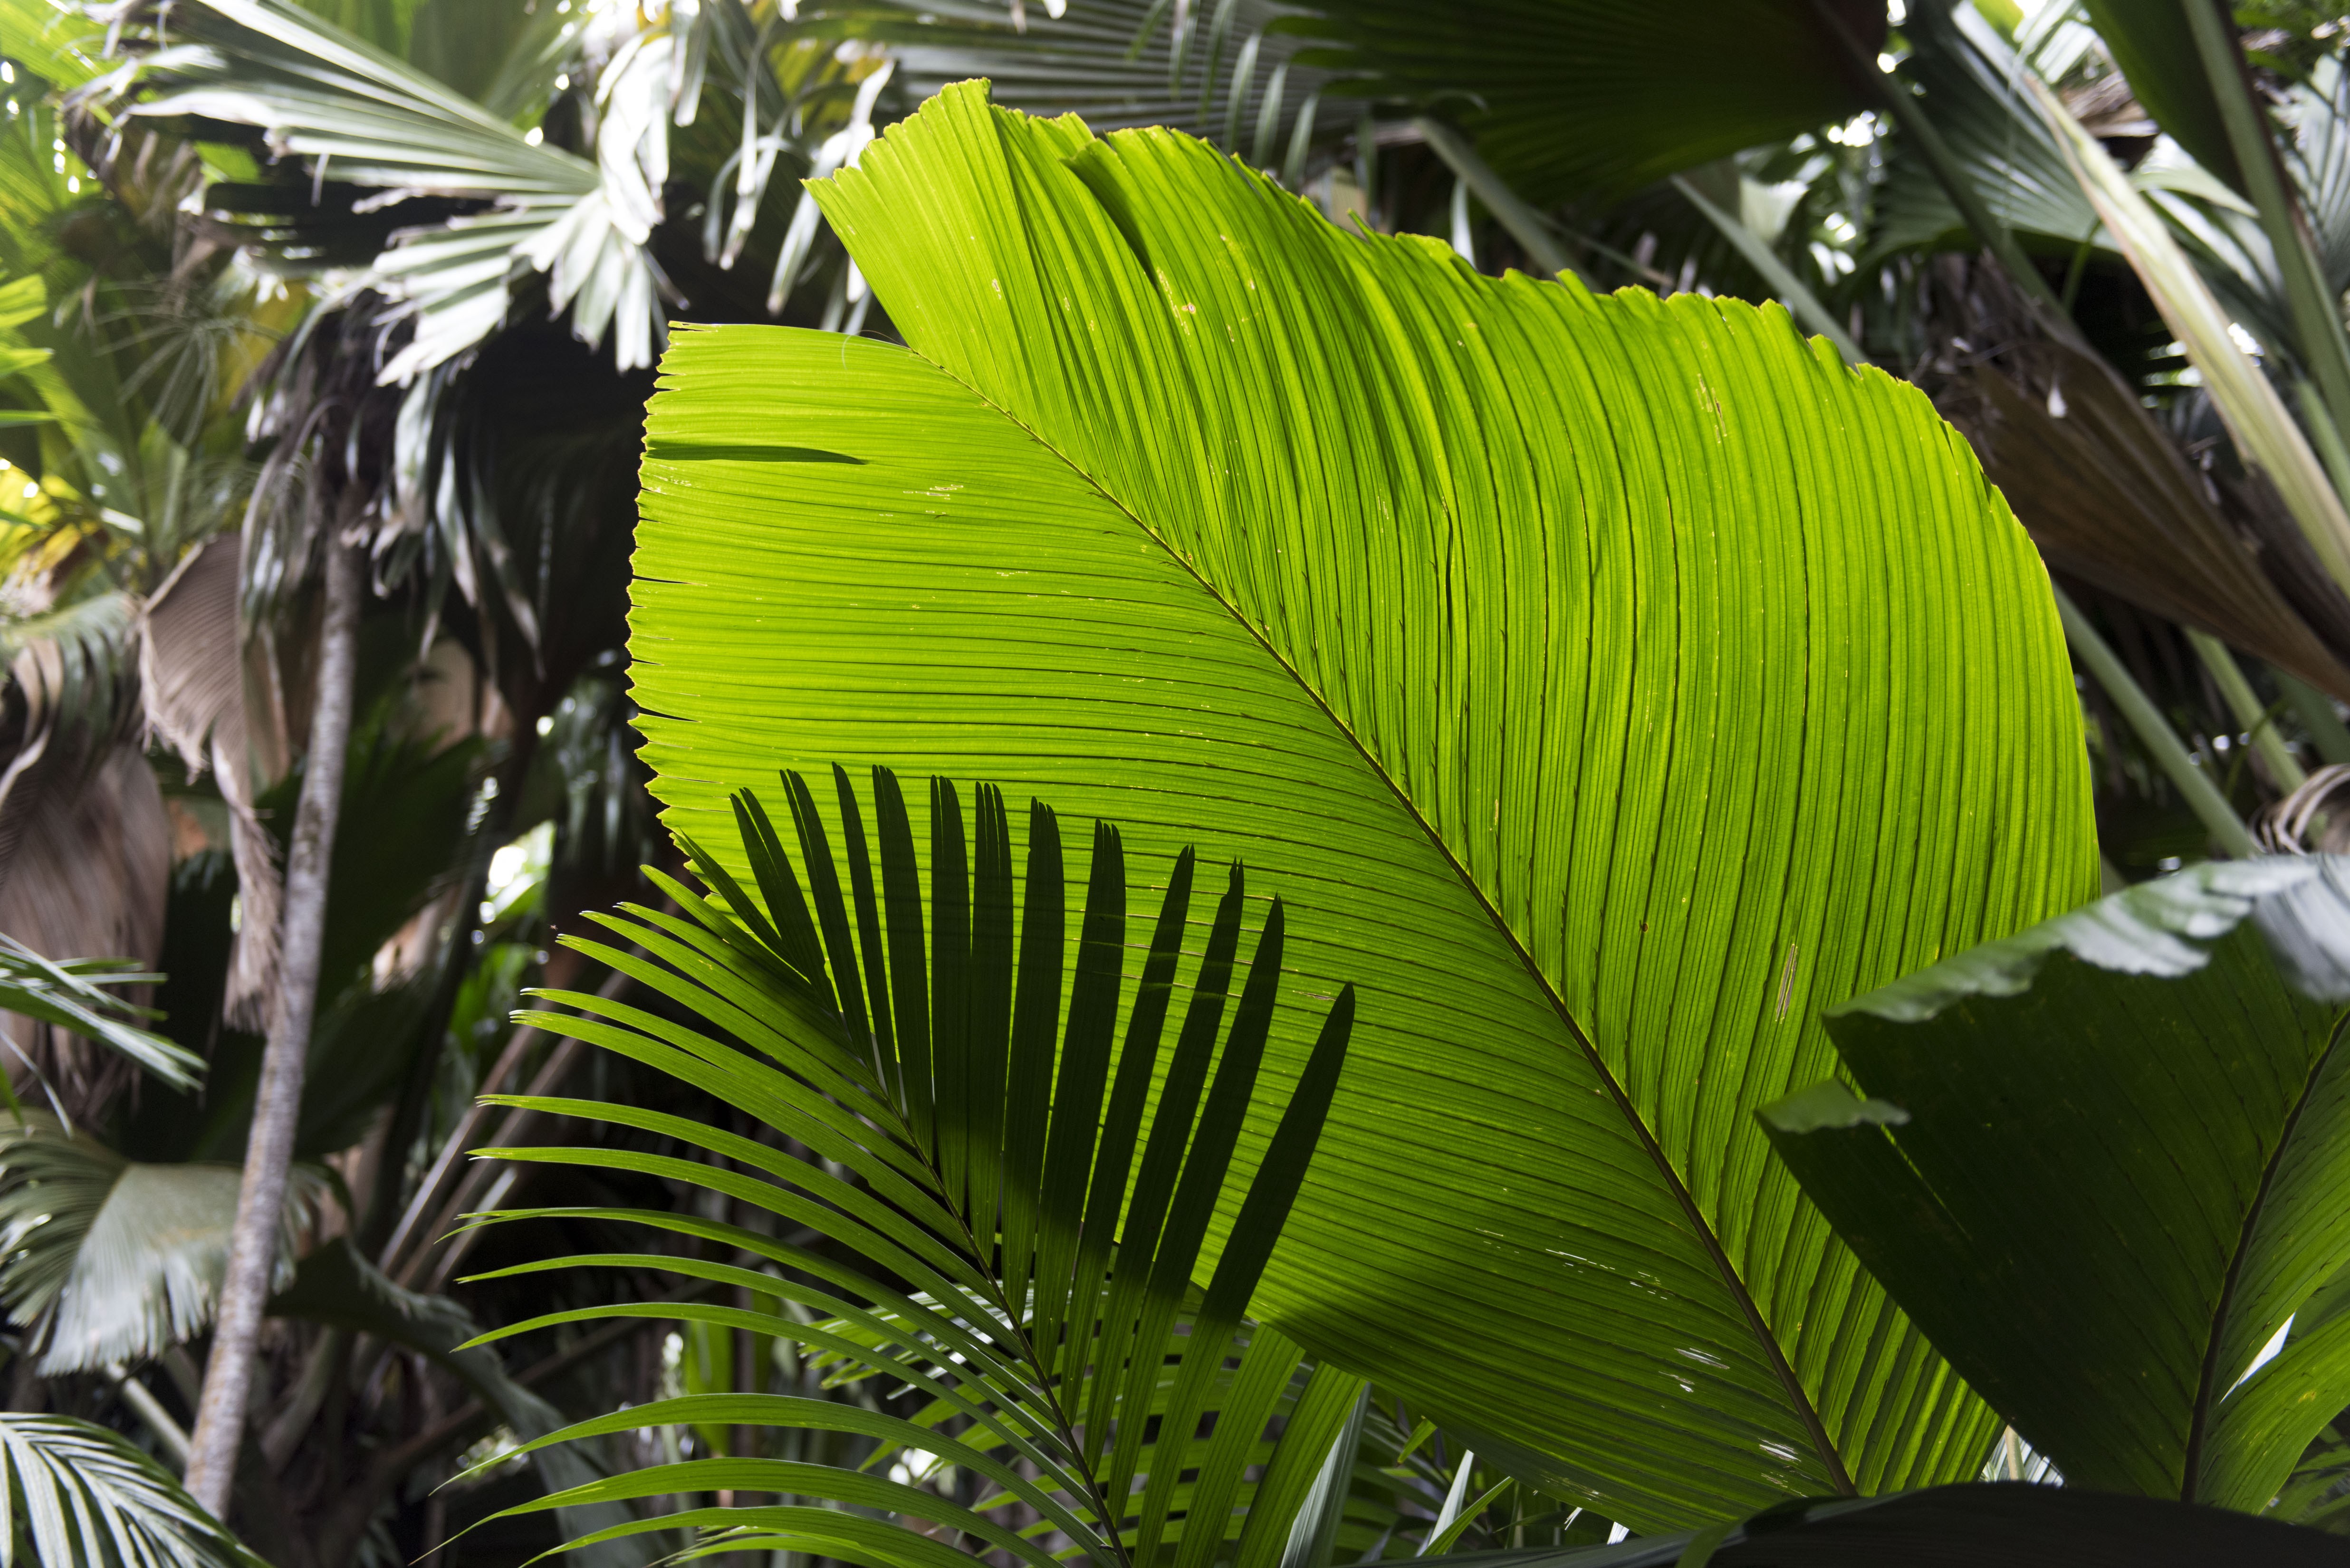 Photo: Detail of palm leaves in the Primeval Palm forest during the trip of Secretary-General Ban Ki-moon to Praslin Island to visit the Vallée de Mai Nature Reserve, a UNESCO World Heritage Site.